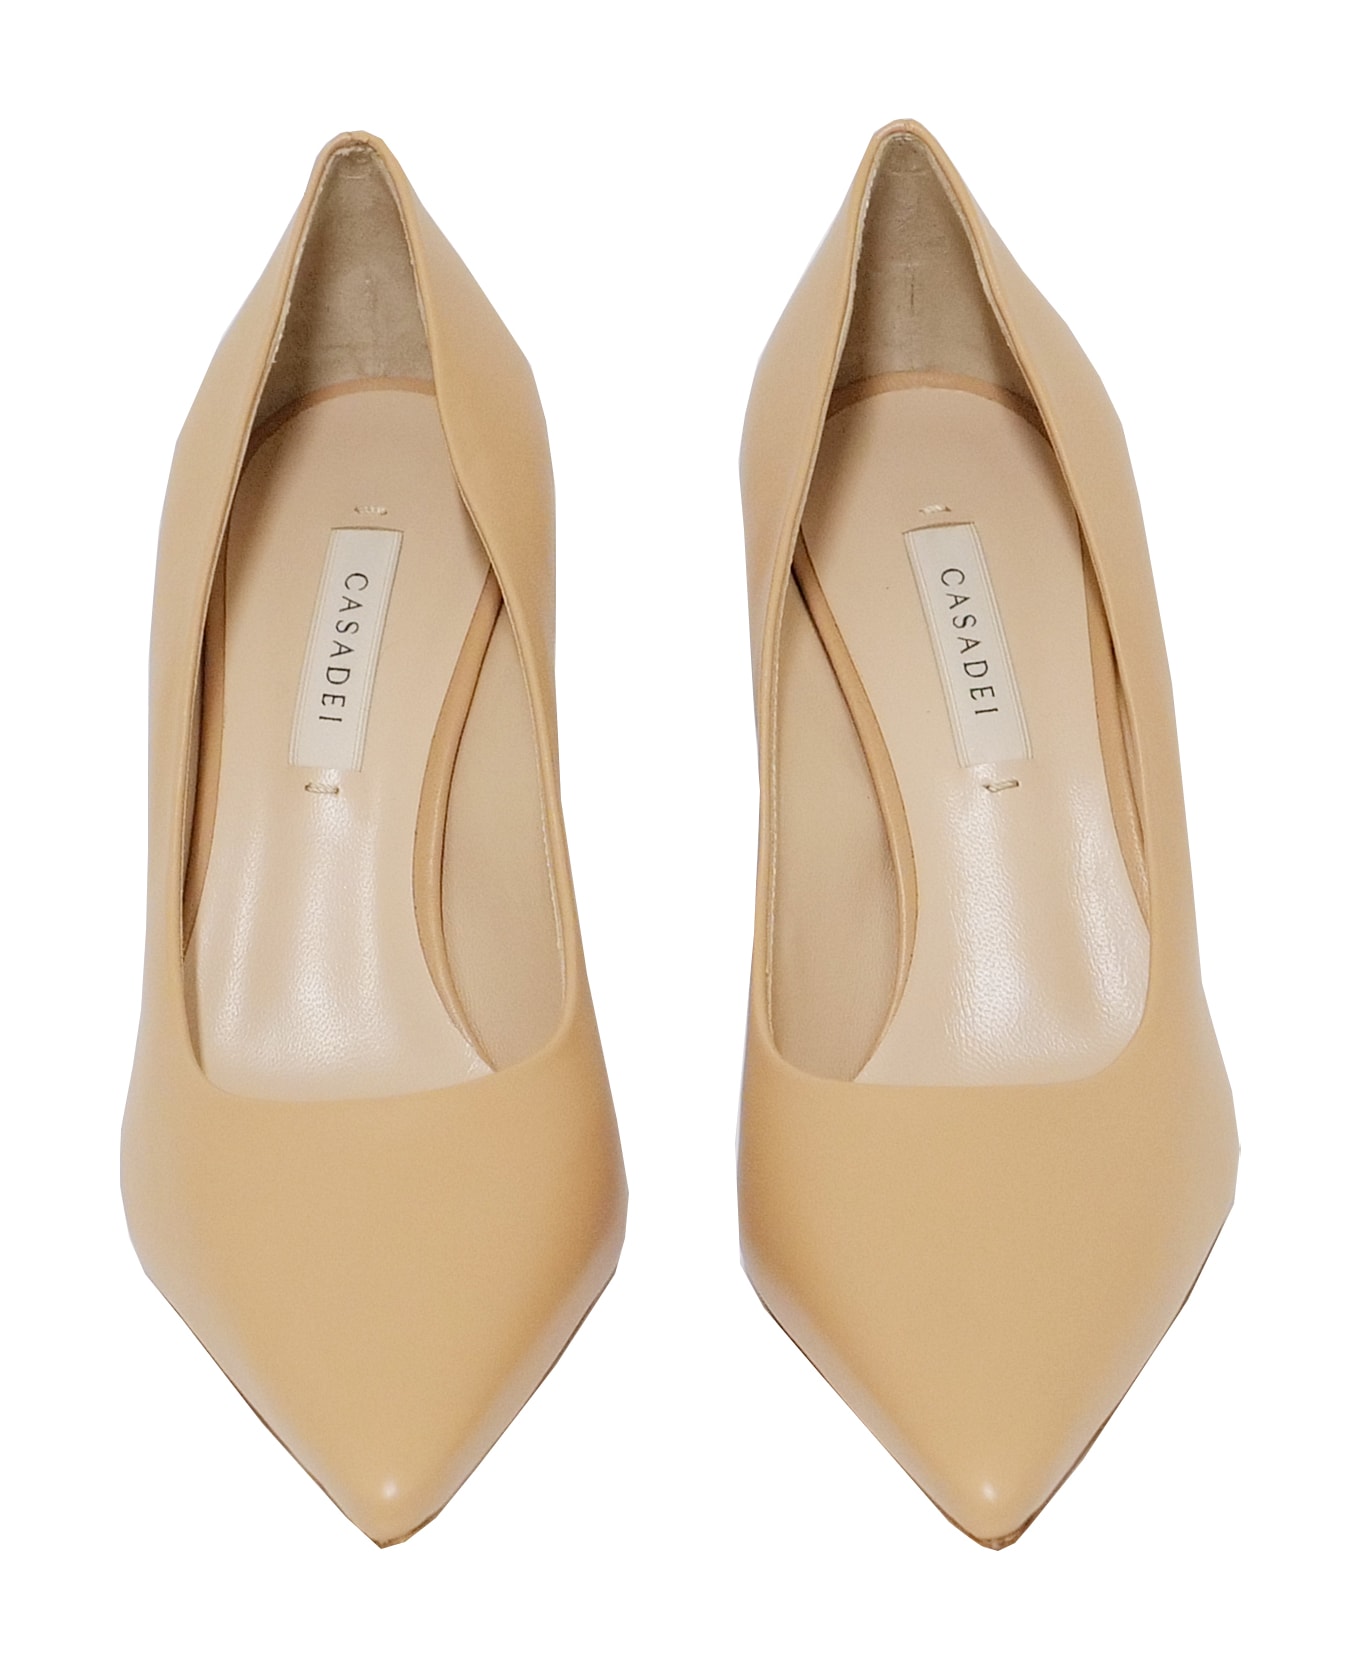 Casadei Shoes With Heel - Nude ハイヒール